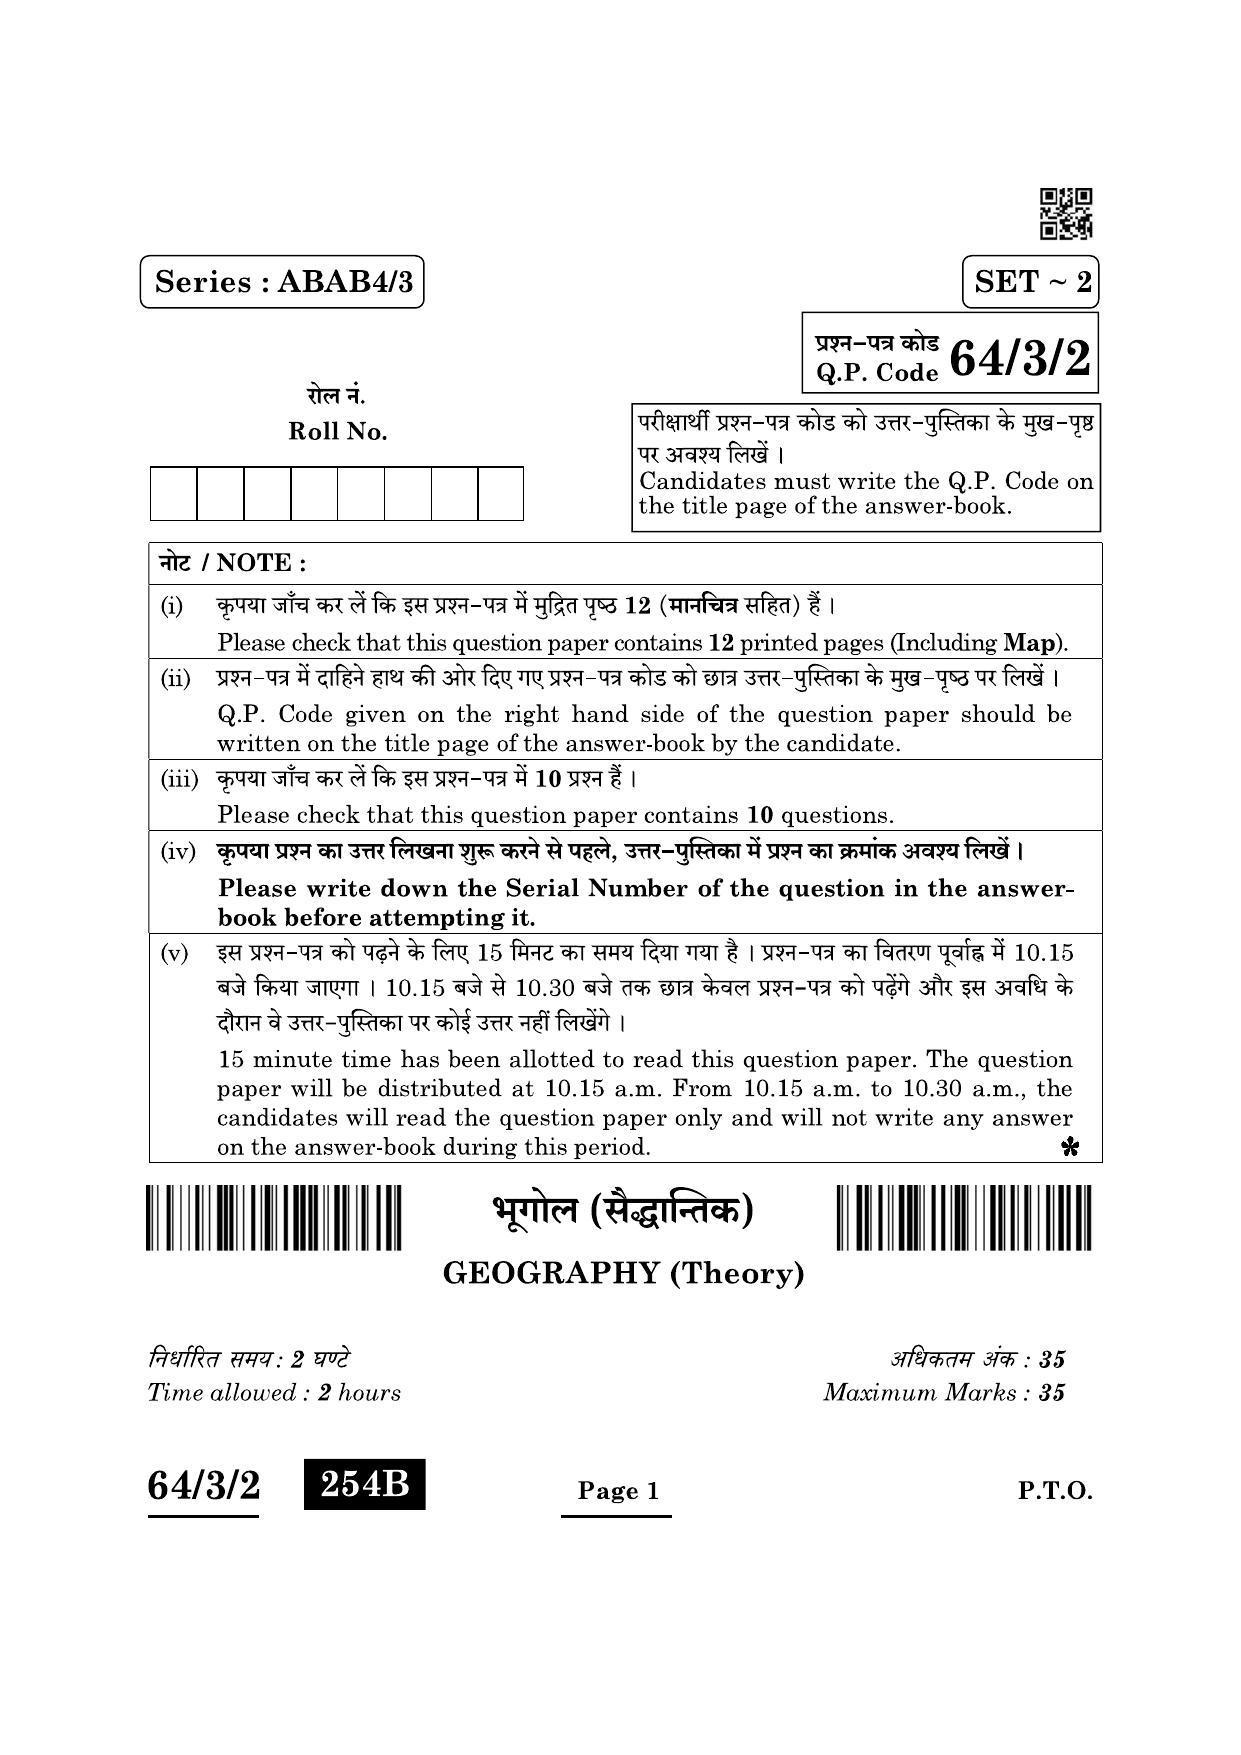 CBSE Class 12 64-3-2 Geography 2022 Question Paper - Page 1